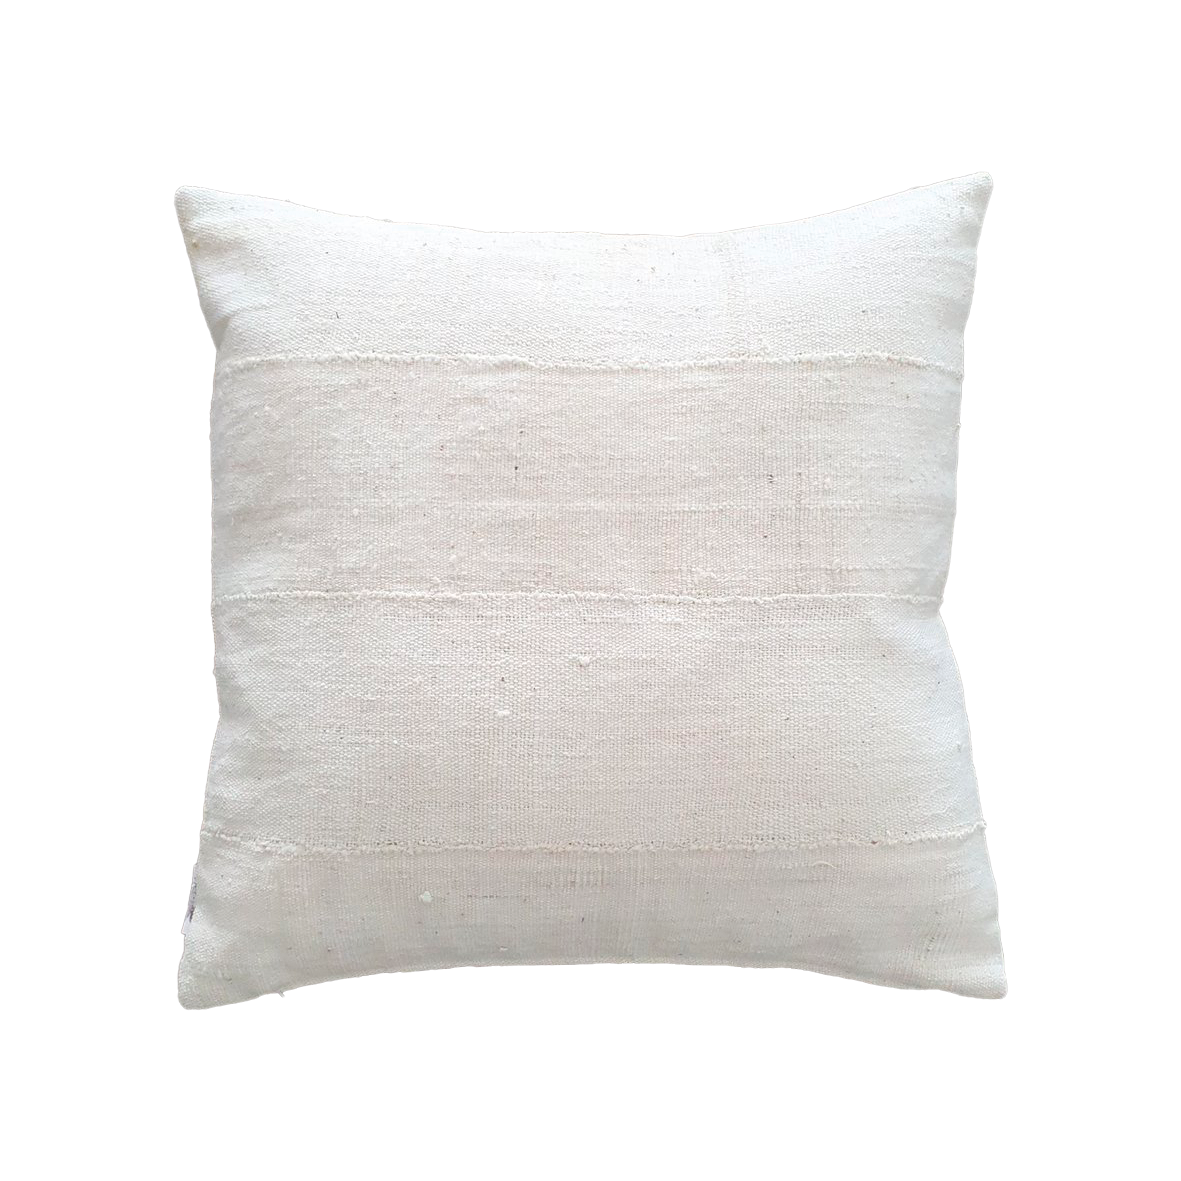 Mud cloth pillow square - off-white